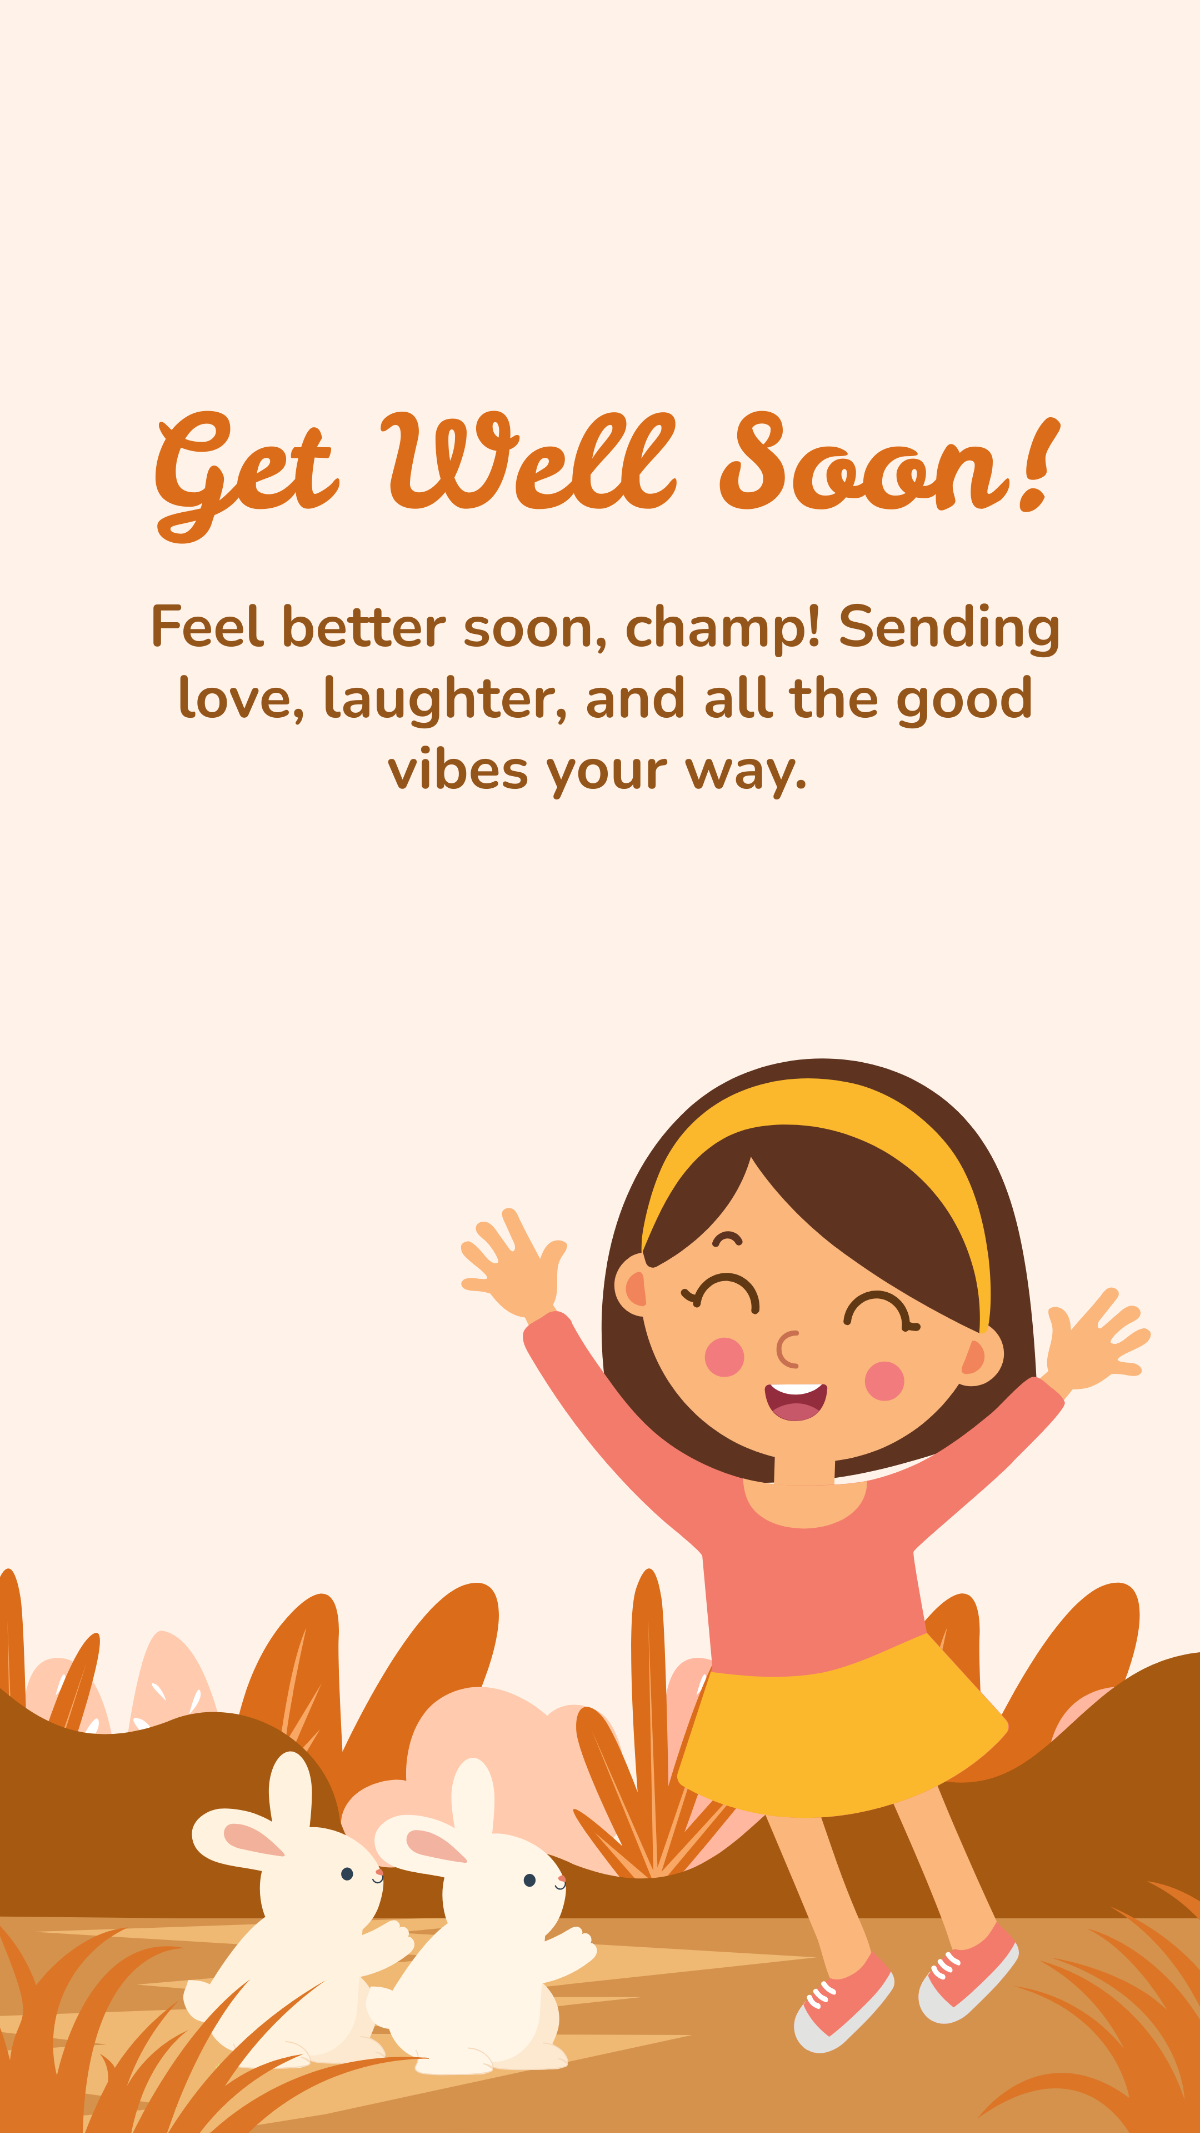 Get Well Soon Message For Children Template